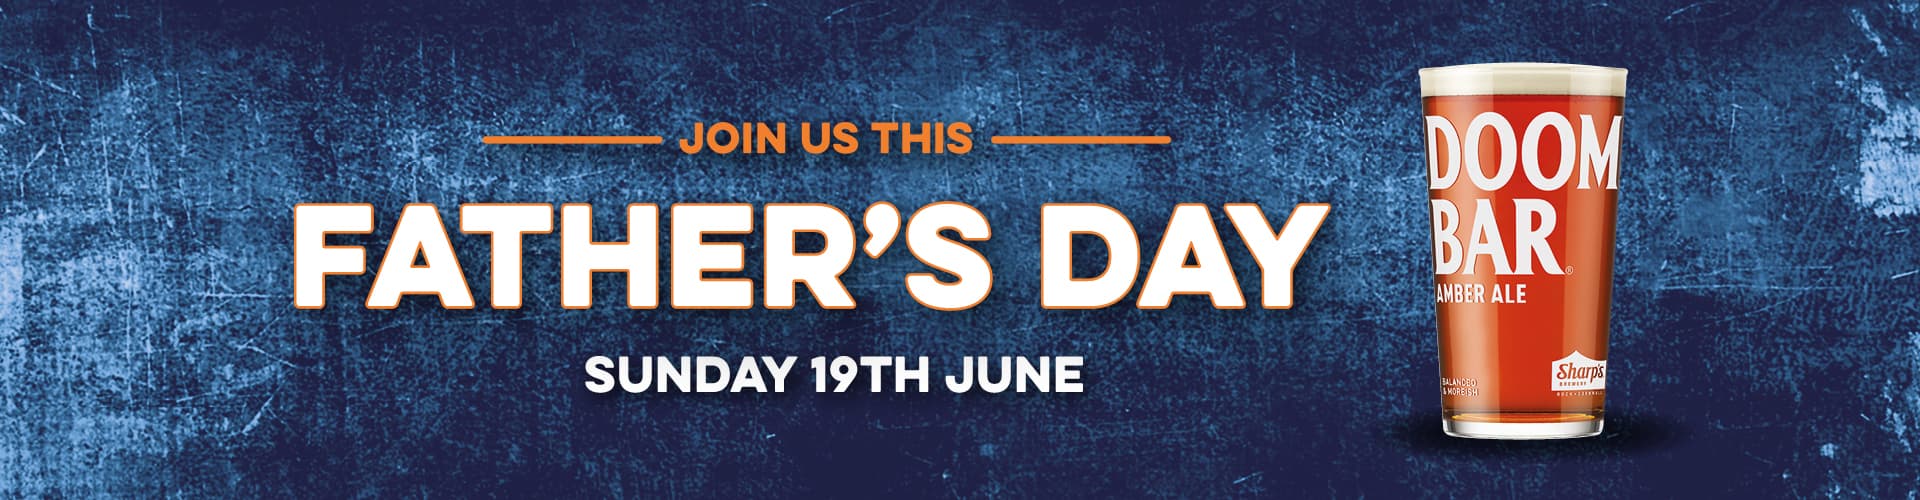 Father's Day at The George pub in Petersfield